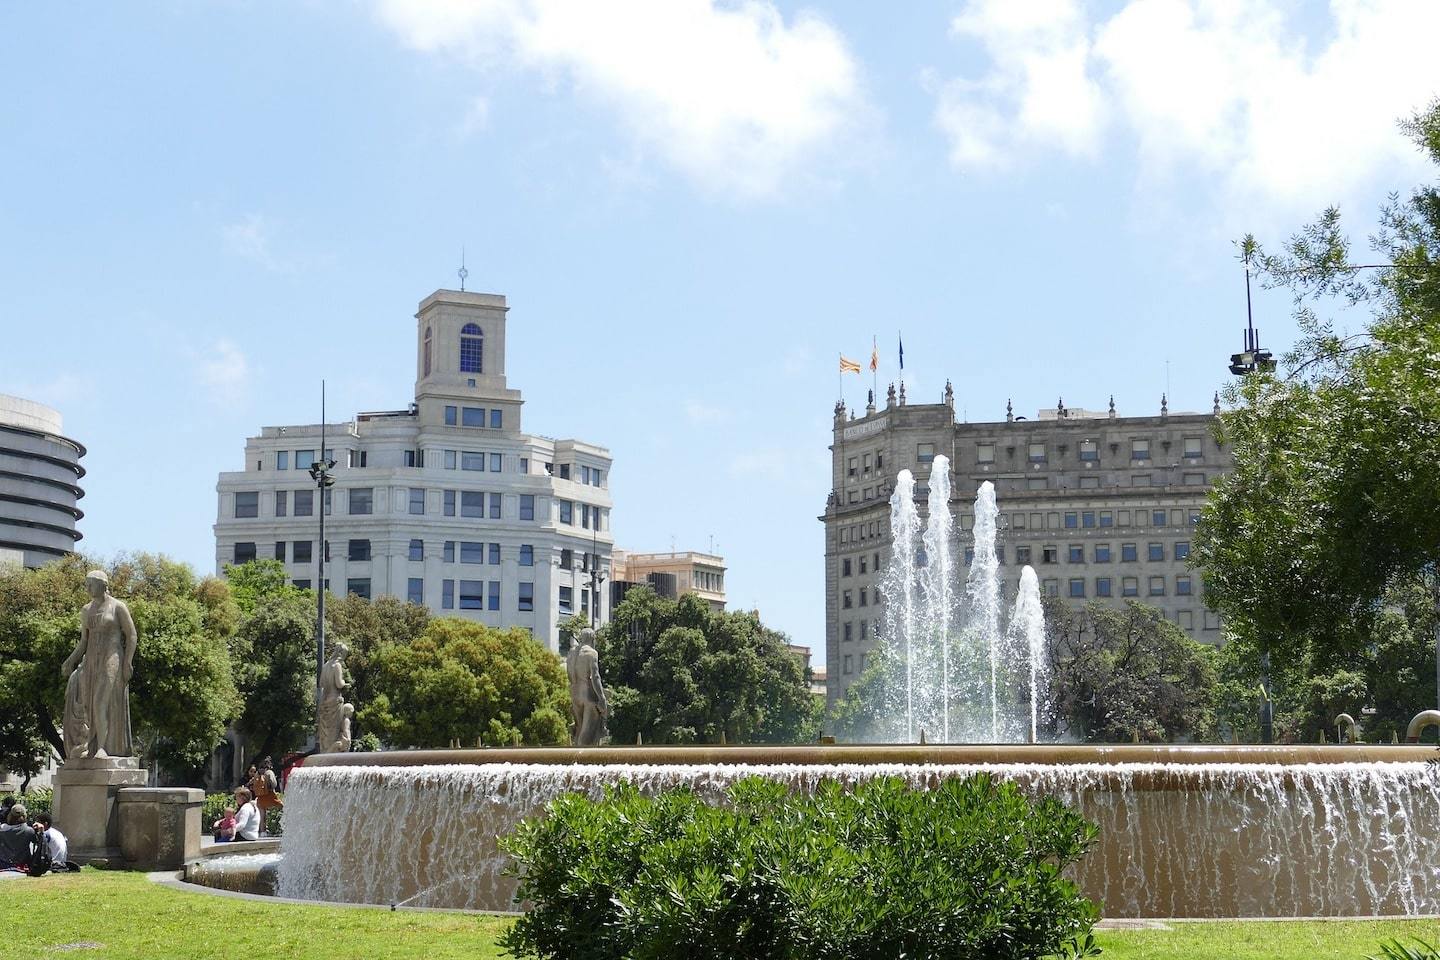 fountain surrounded by grass, trees and buildings